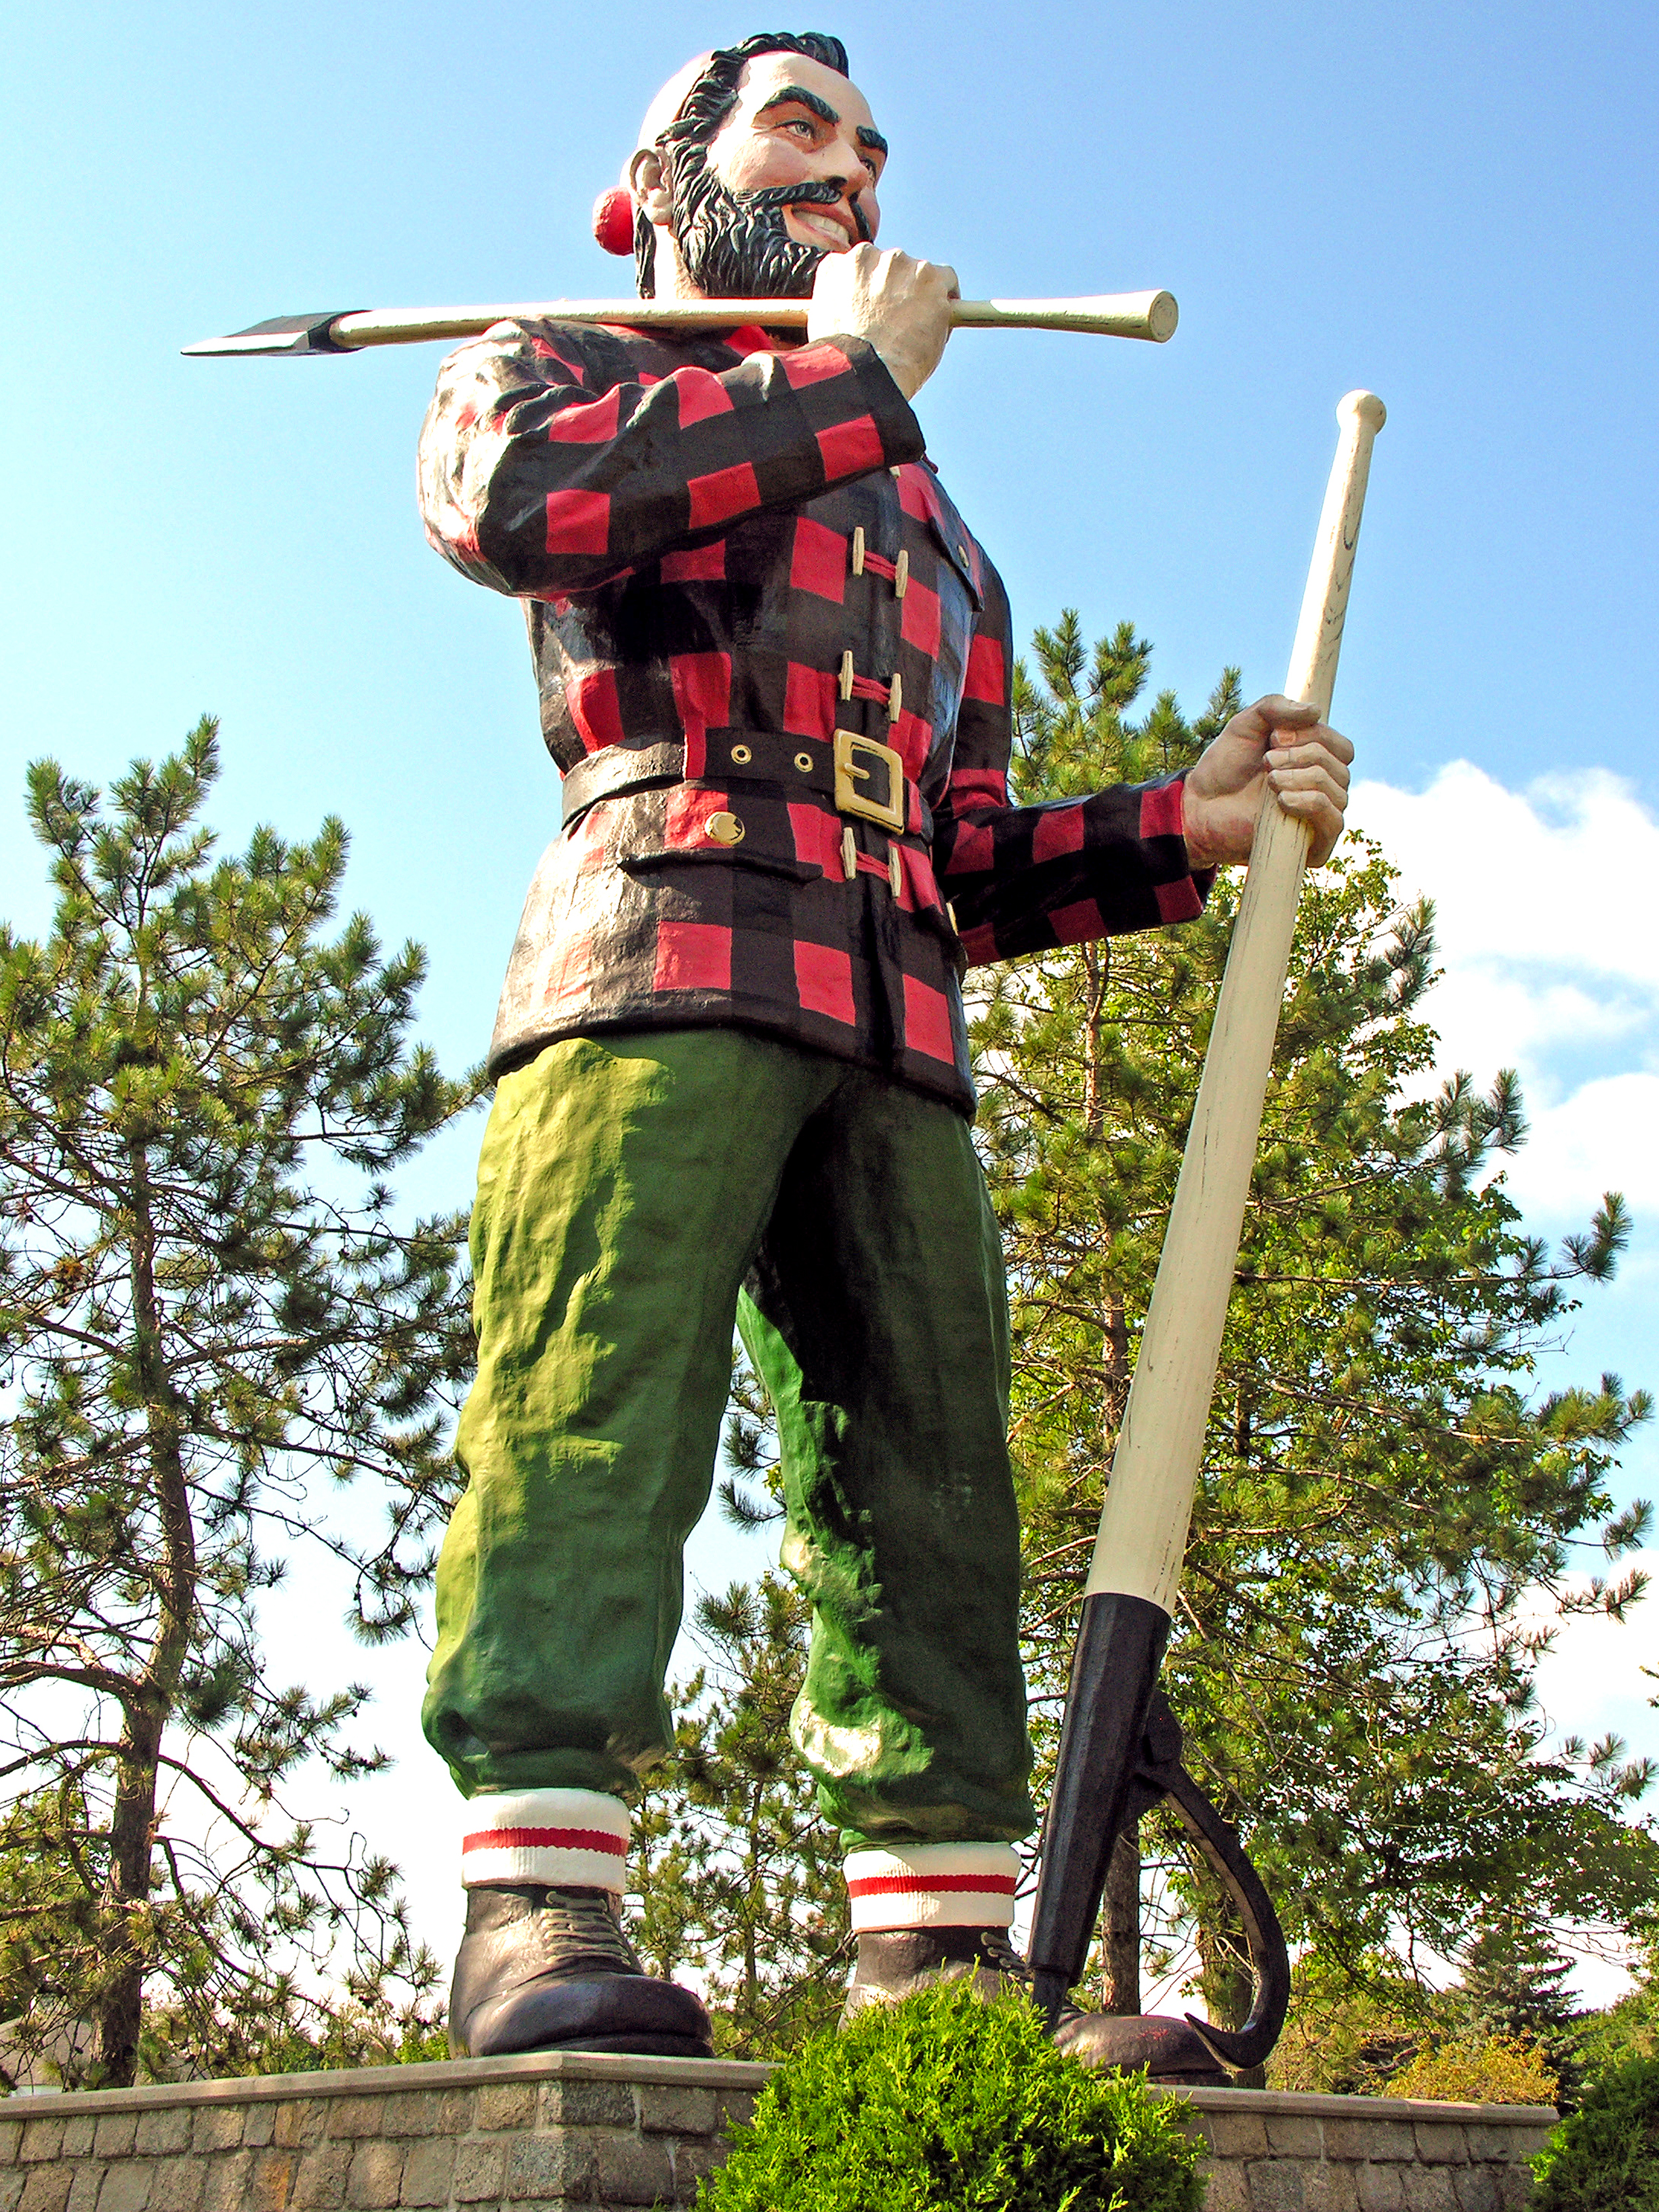  From  RoadsideAmerica.com : Bangor's Paul Bunyan, "Reputed to be the largest statue of Paul Bunyan in the world," according to its sign, stands on a stone pedestal in front of the Bangor Civic Center in Bass Park. The statue is 31 feet high and weig